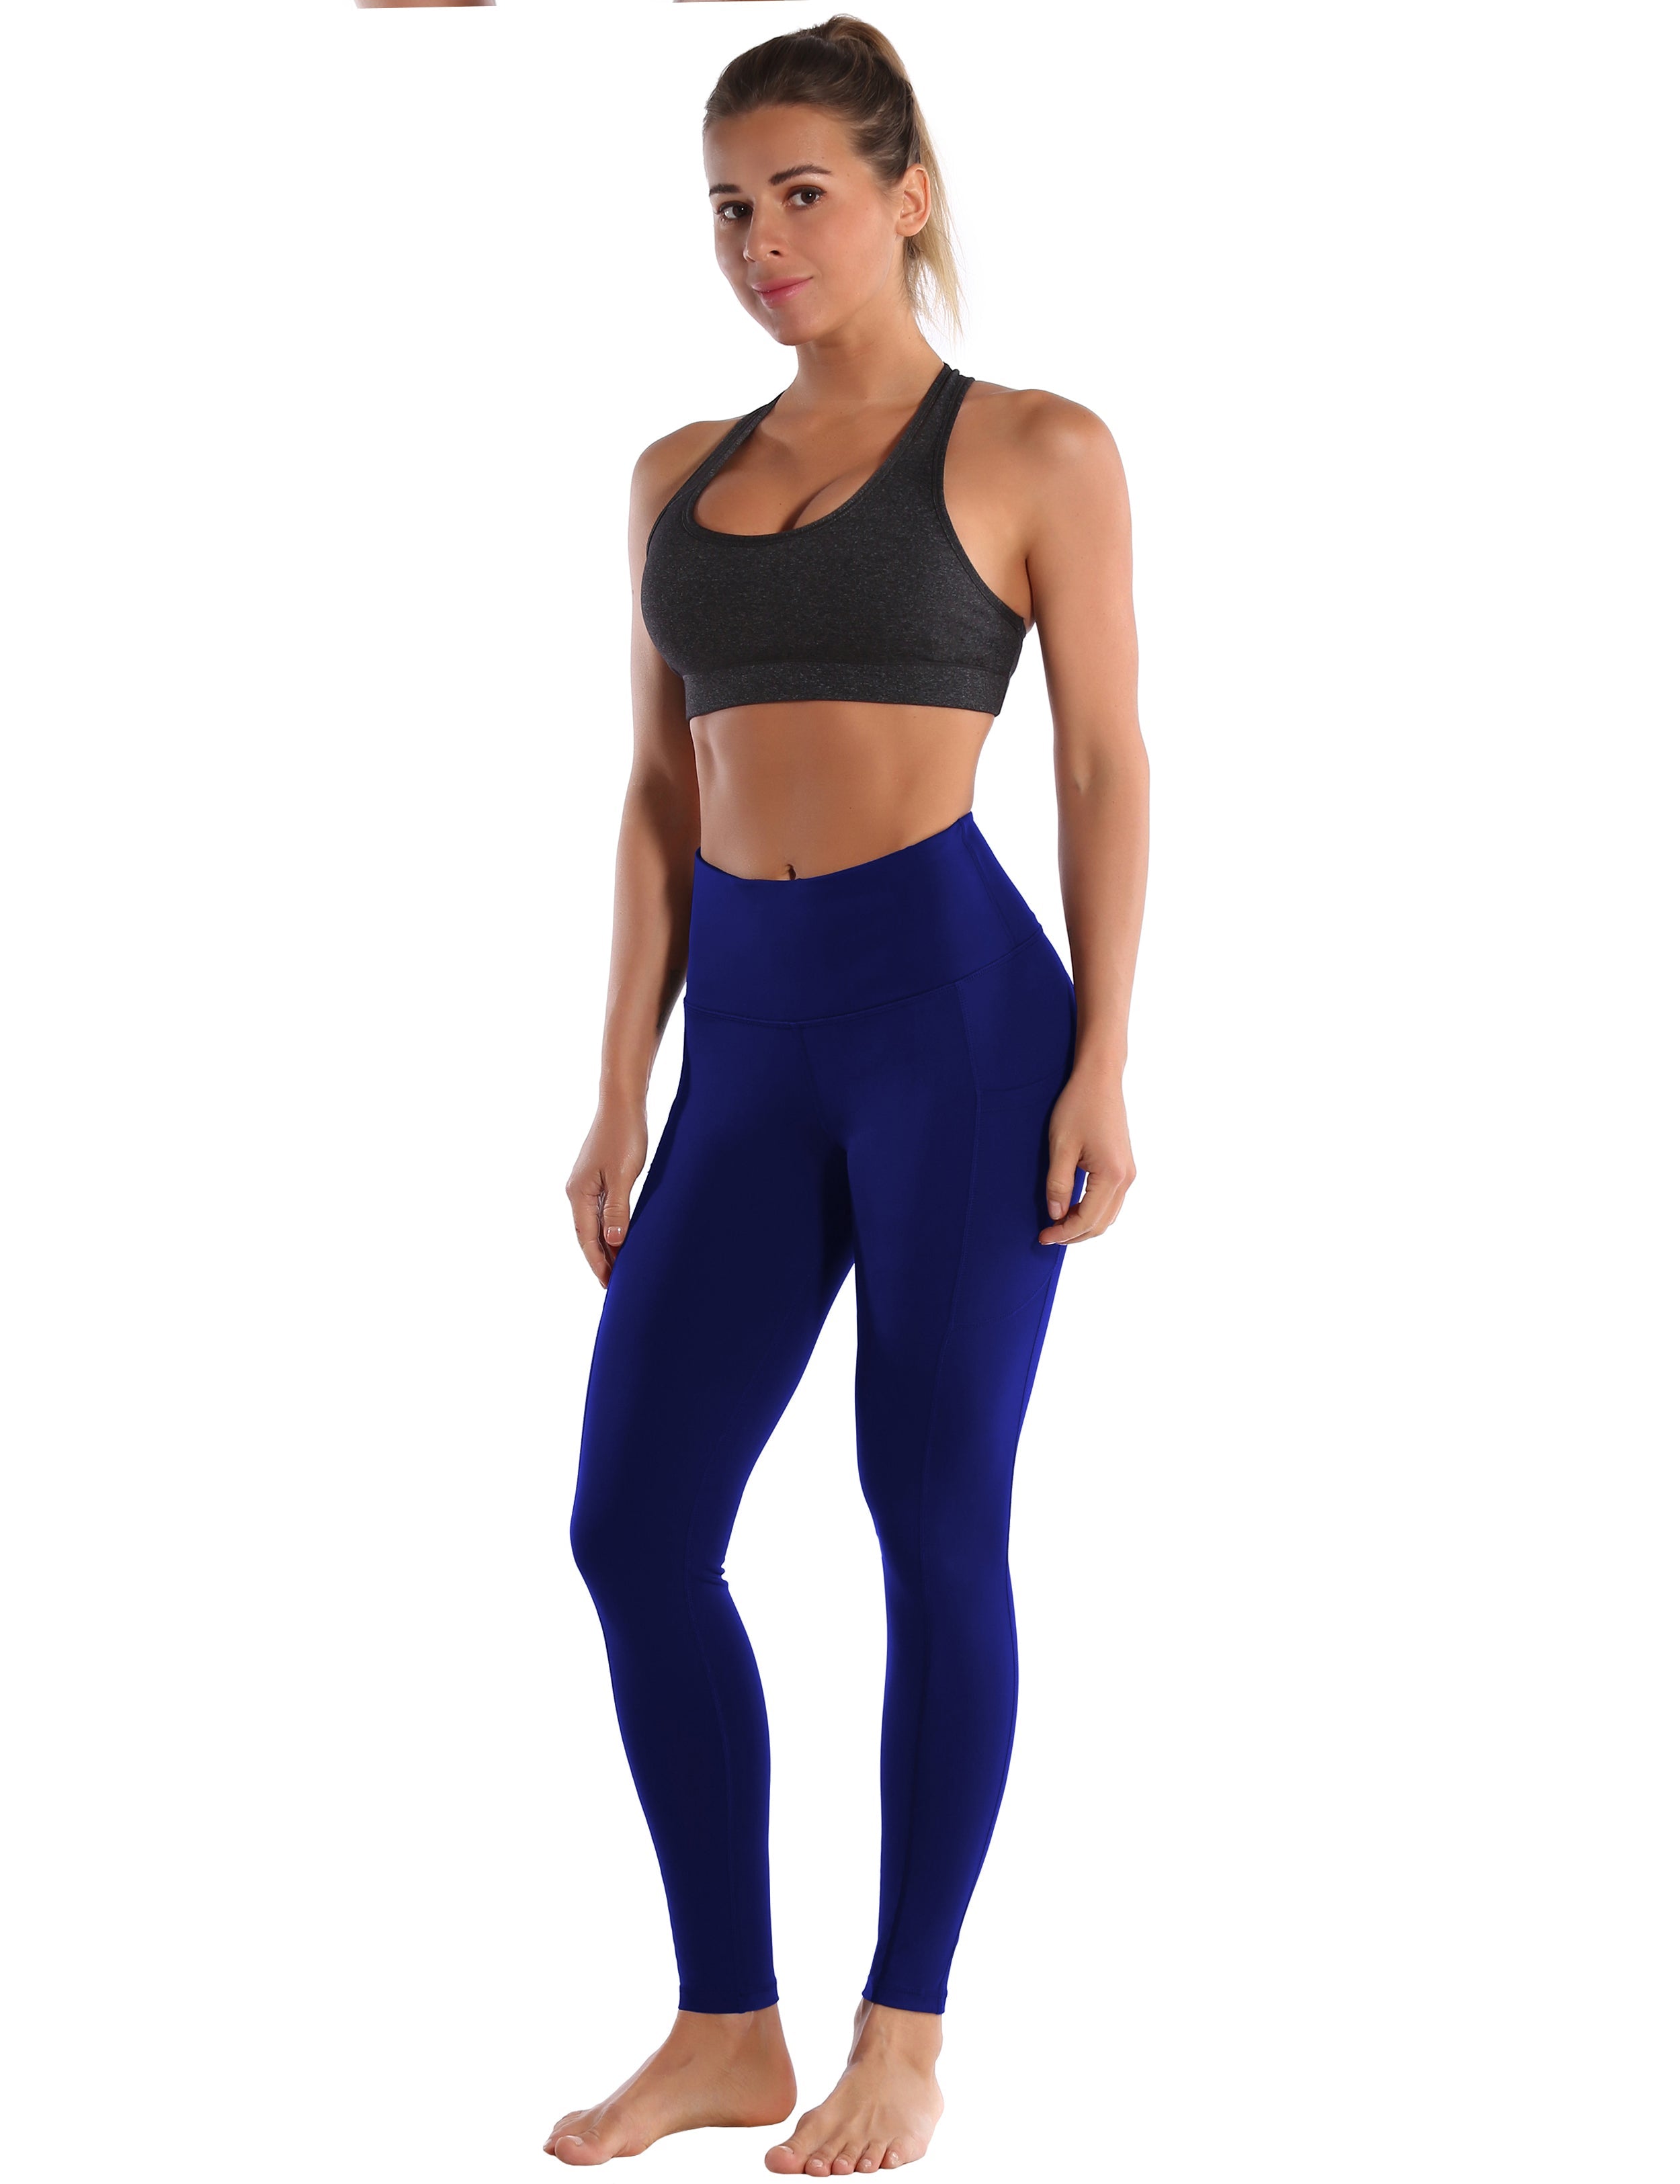 Hip Line Side Pockets Yoga Pants navy Sexy Hip Line Side Pockets 75%Nylon/25%Spandex Fabric doesn't attract lint easily 4-way stretch No see-through Moisture-wicking Tummy control Inner pocket Two lengths